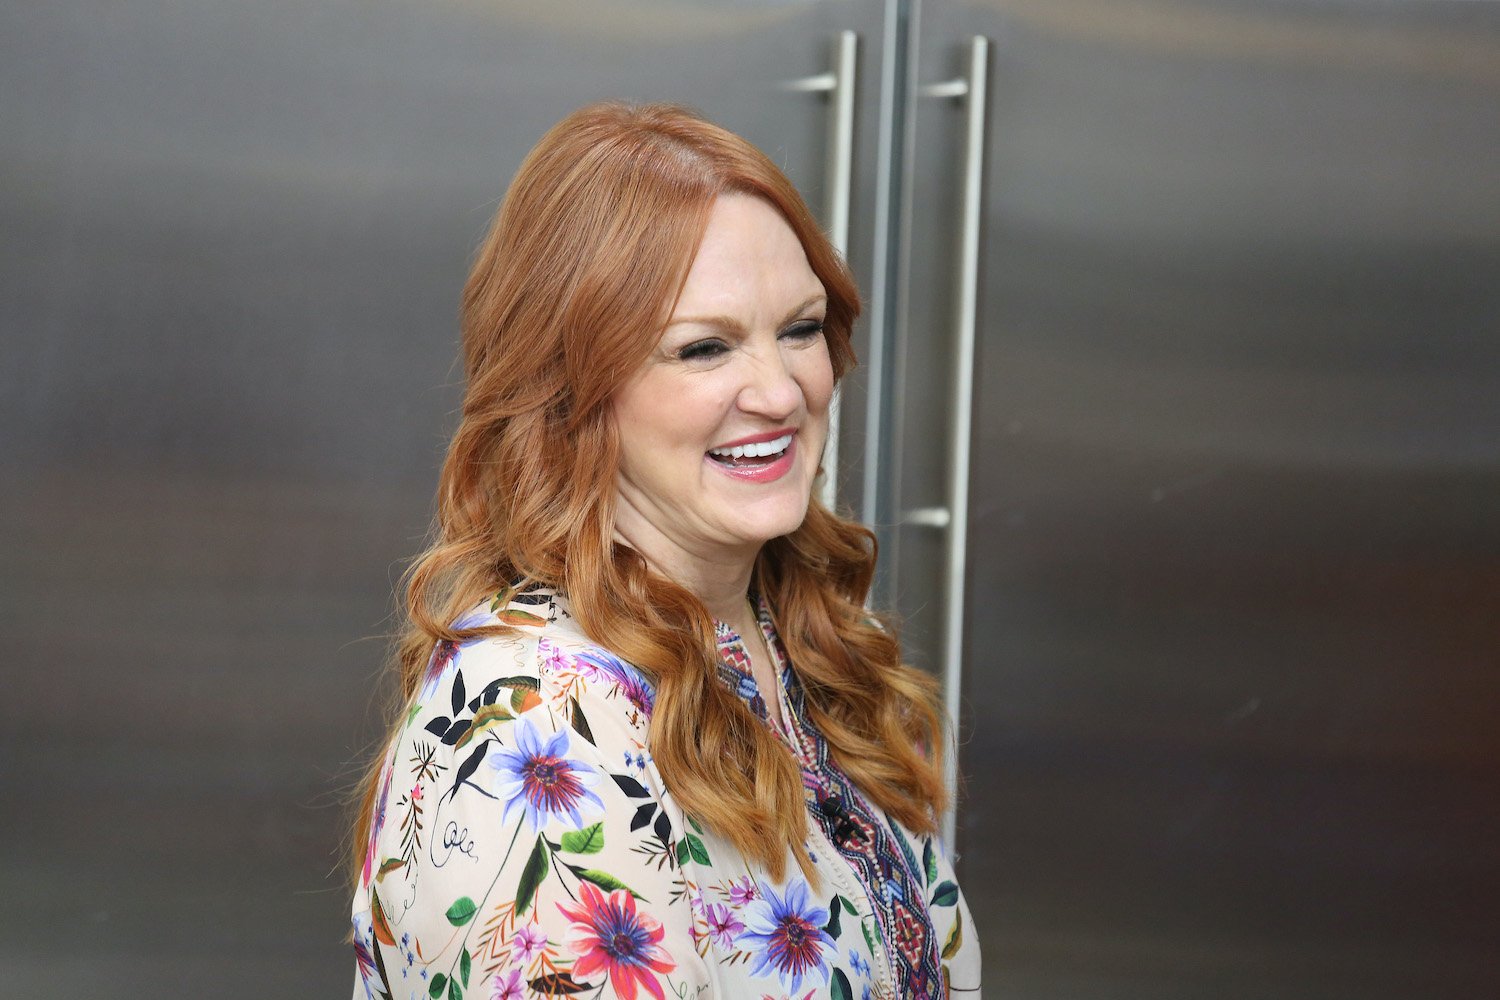 Ree Drummond wears a bright shirt and smiles on the set of the 'Today' show in 2019.